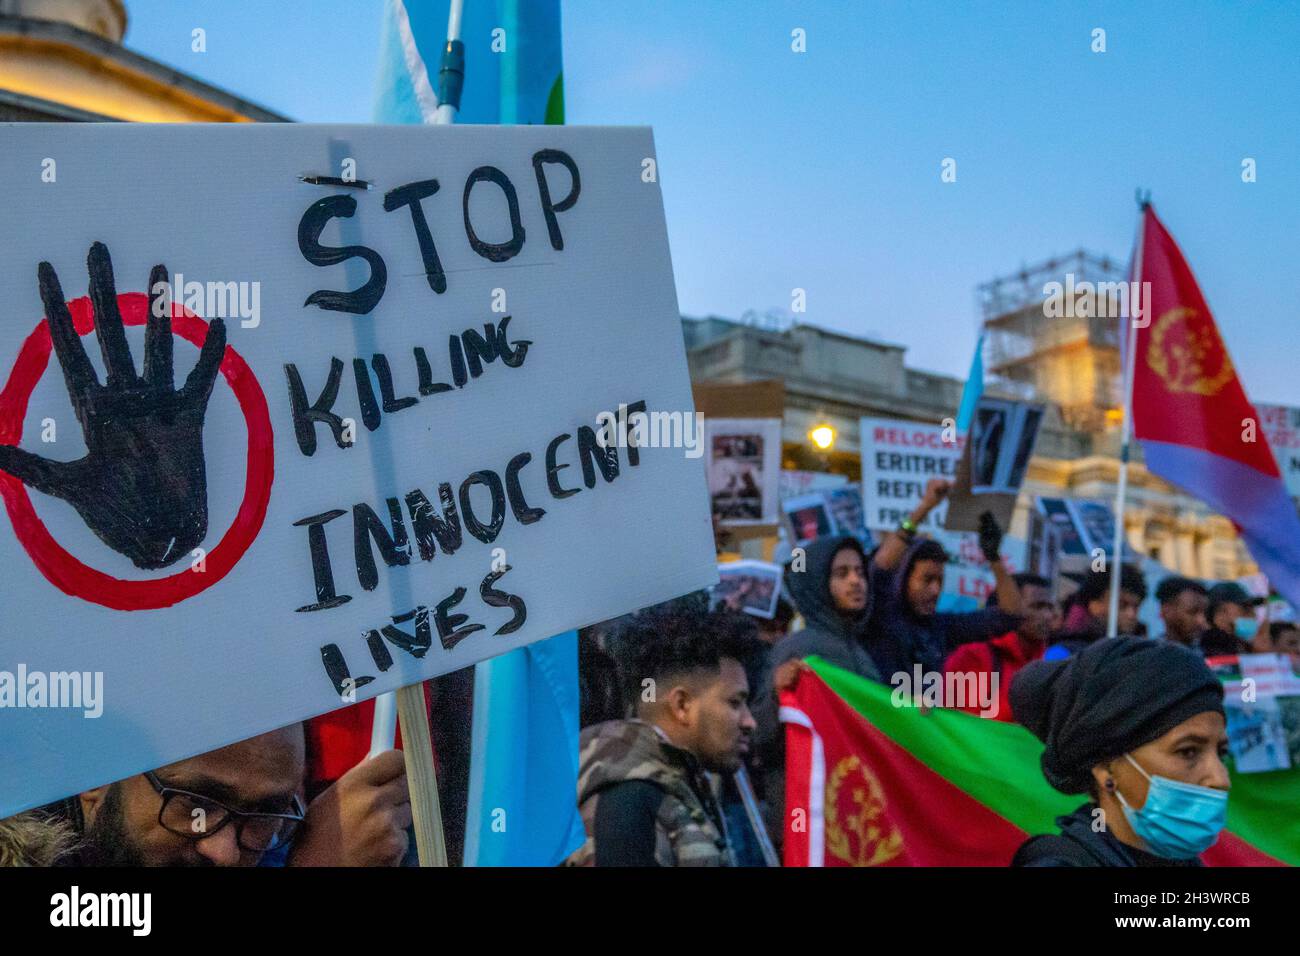 A crowd of protesters on Trafalgar Square, London, waving flags and placards stating 'Stop killing innocent lives' in protest against alleged human rights abuse of refugees from Eritrea. Stock Photo